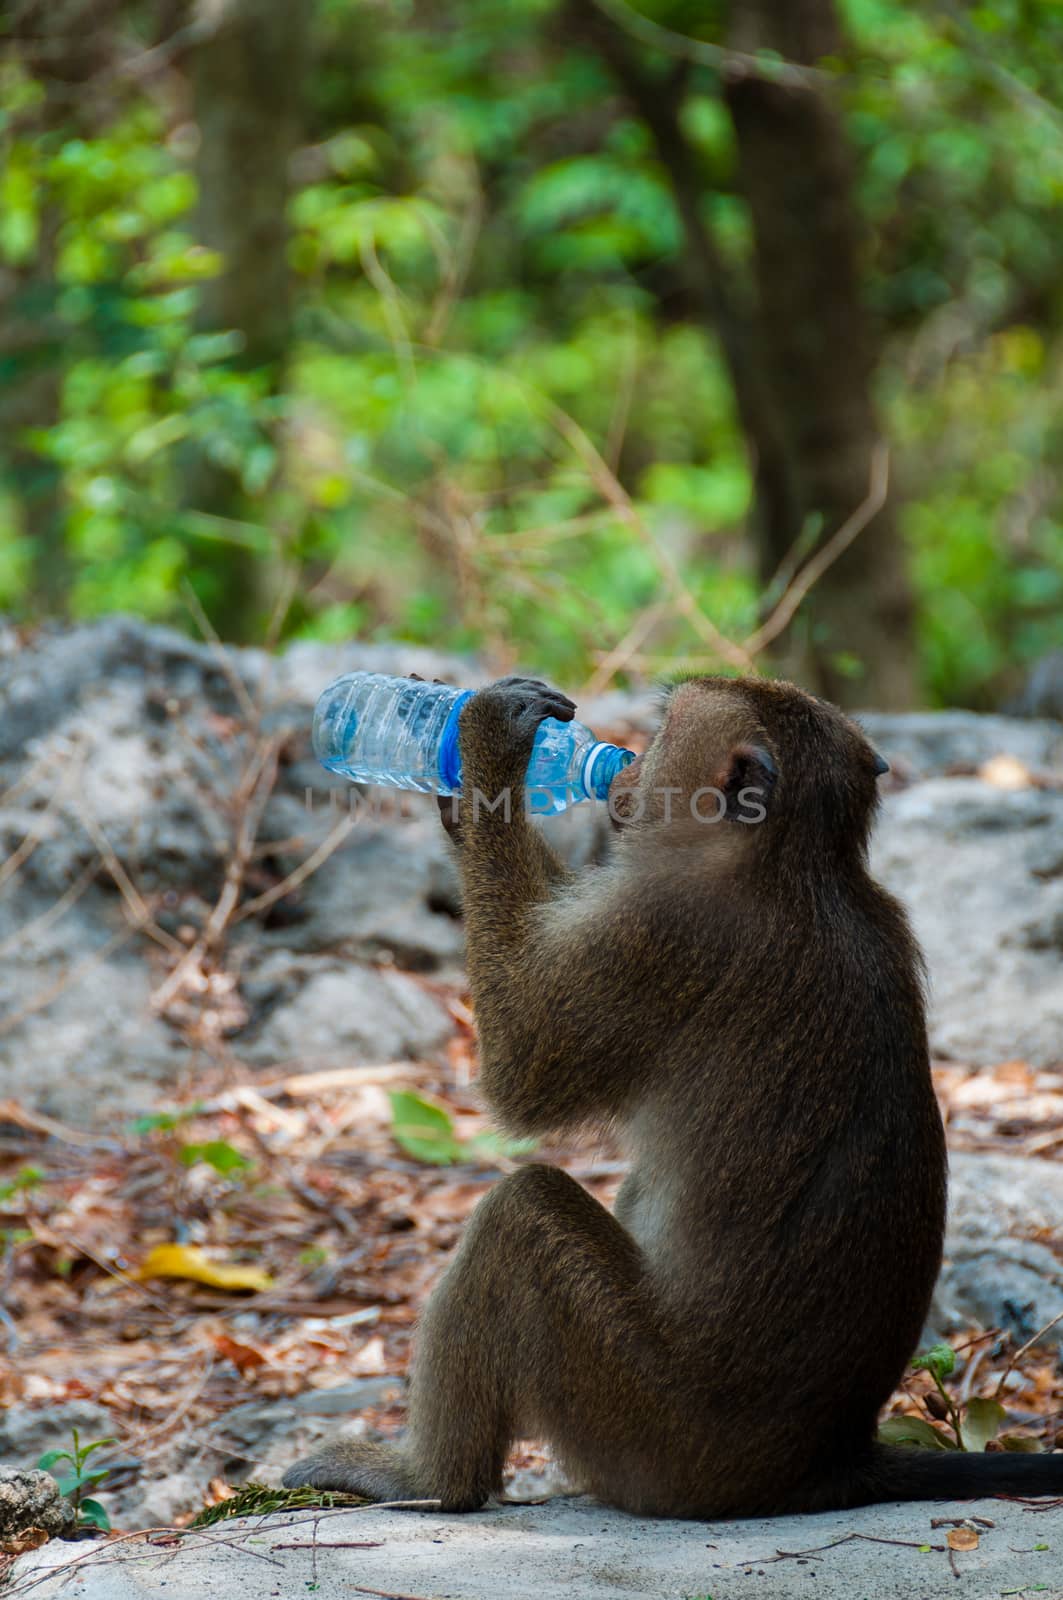 Monkey Rhesus Macaque drinking from a water bottle by attiarndt